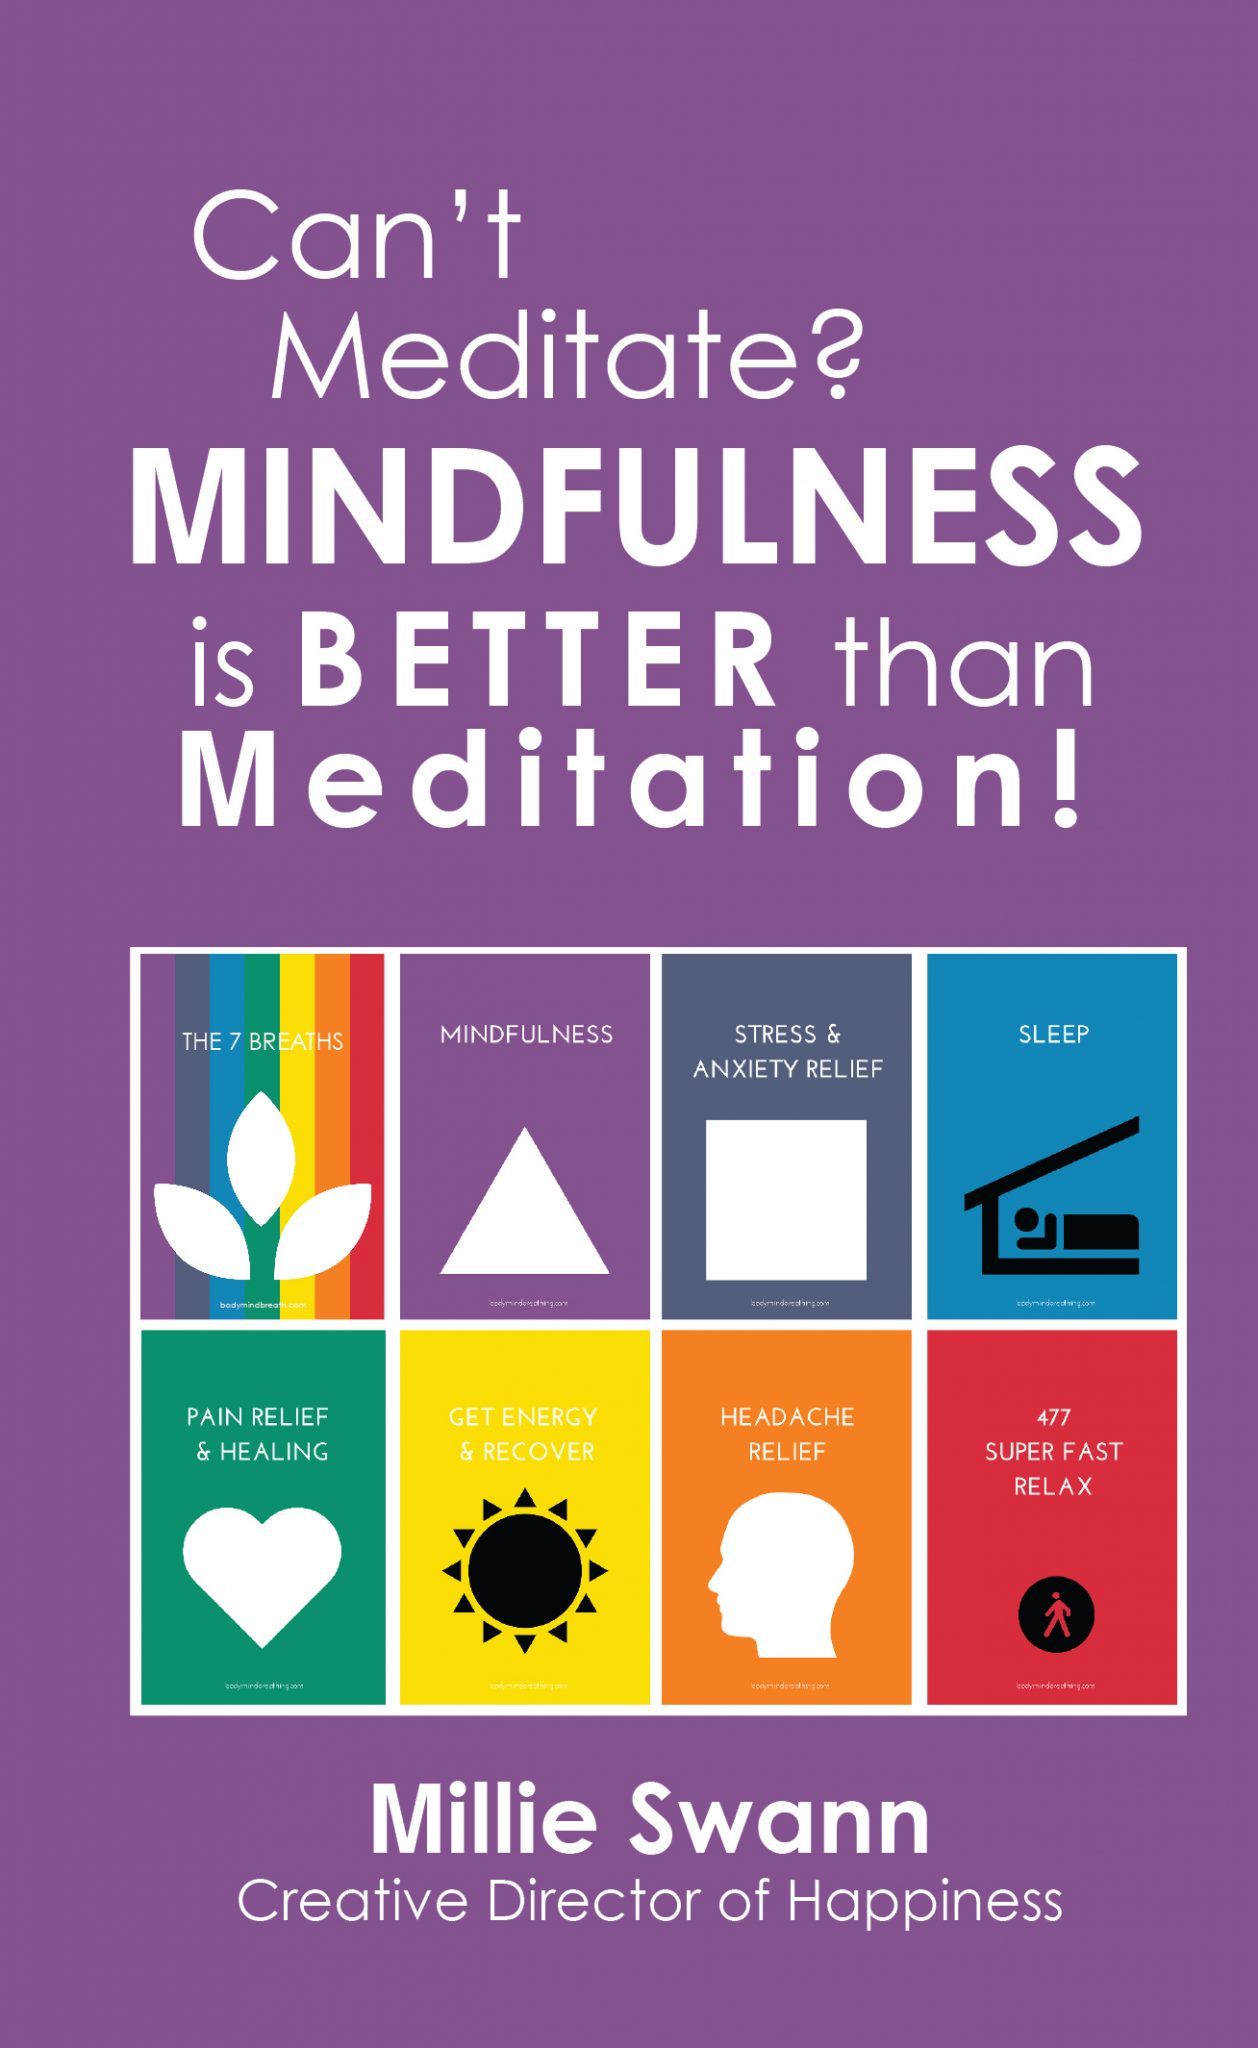 Can’t Meditate? Mindfulness is Better